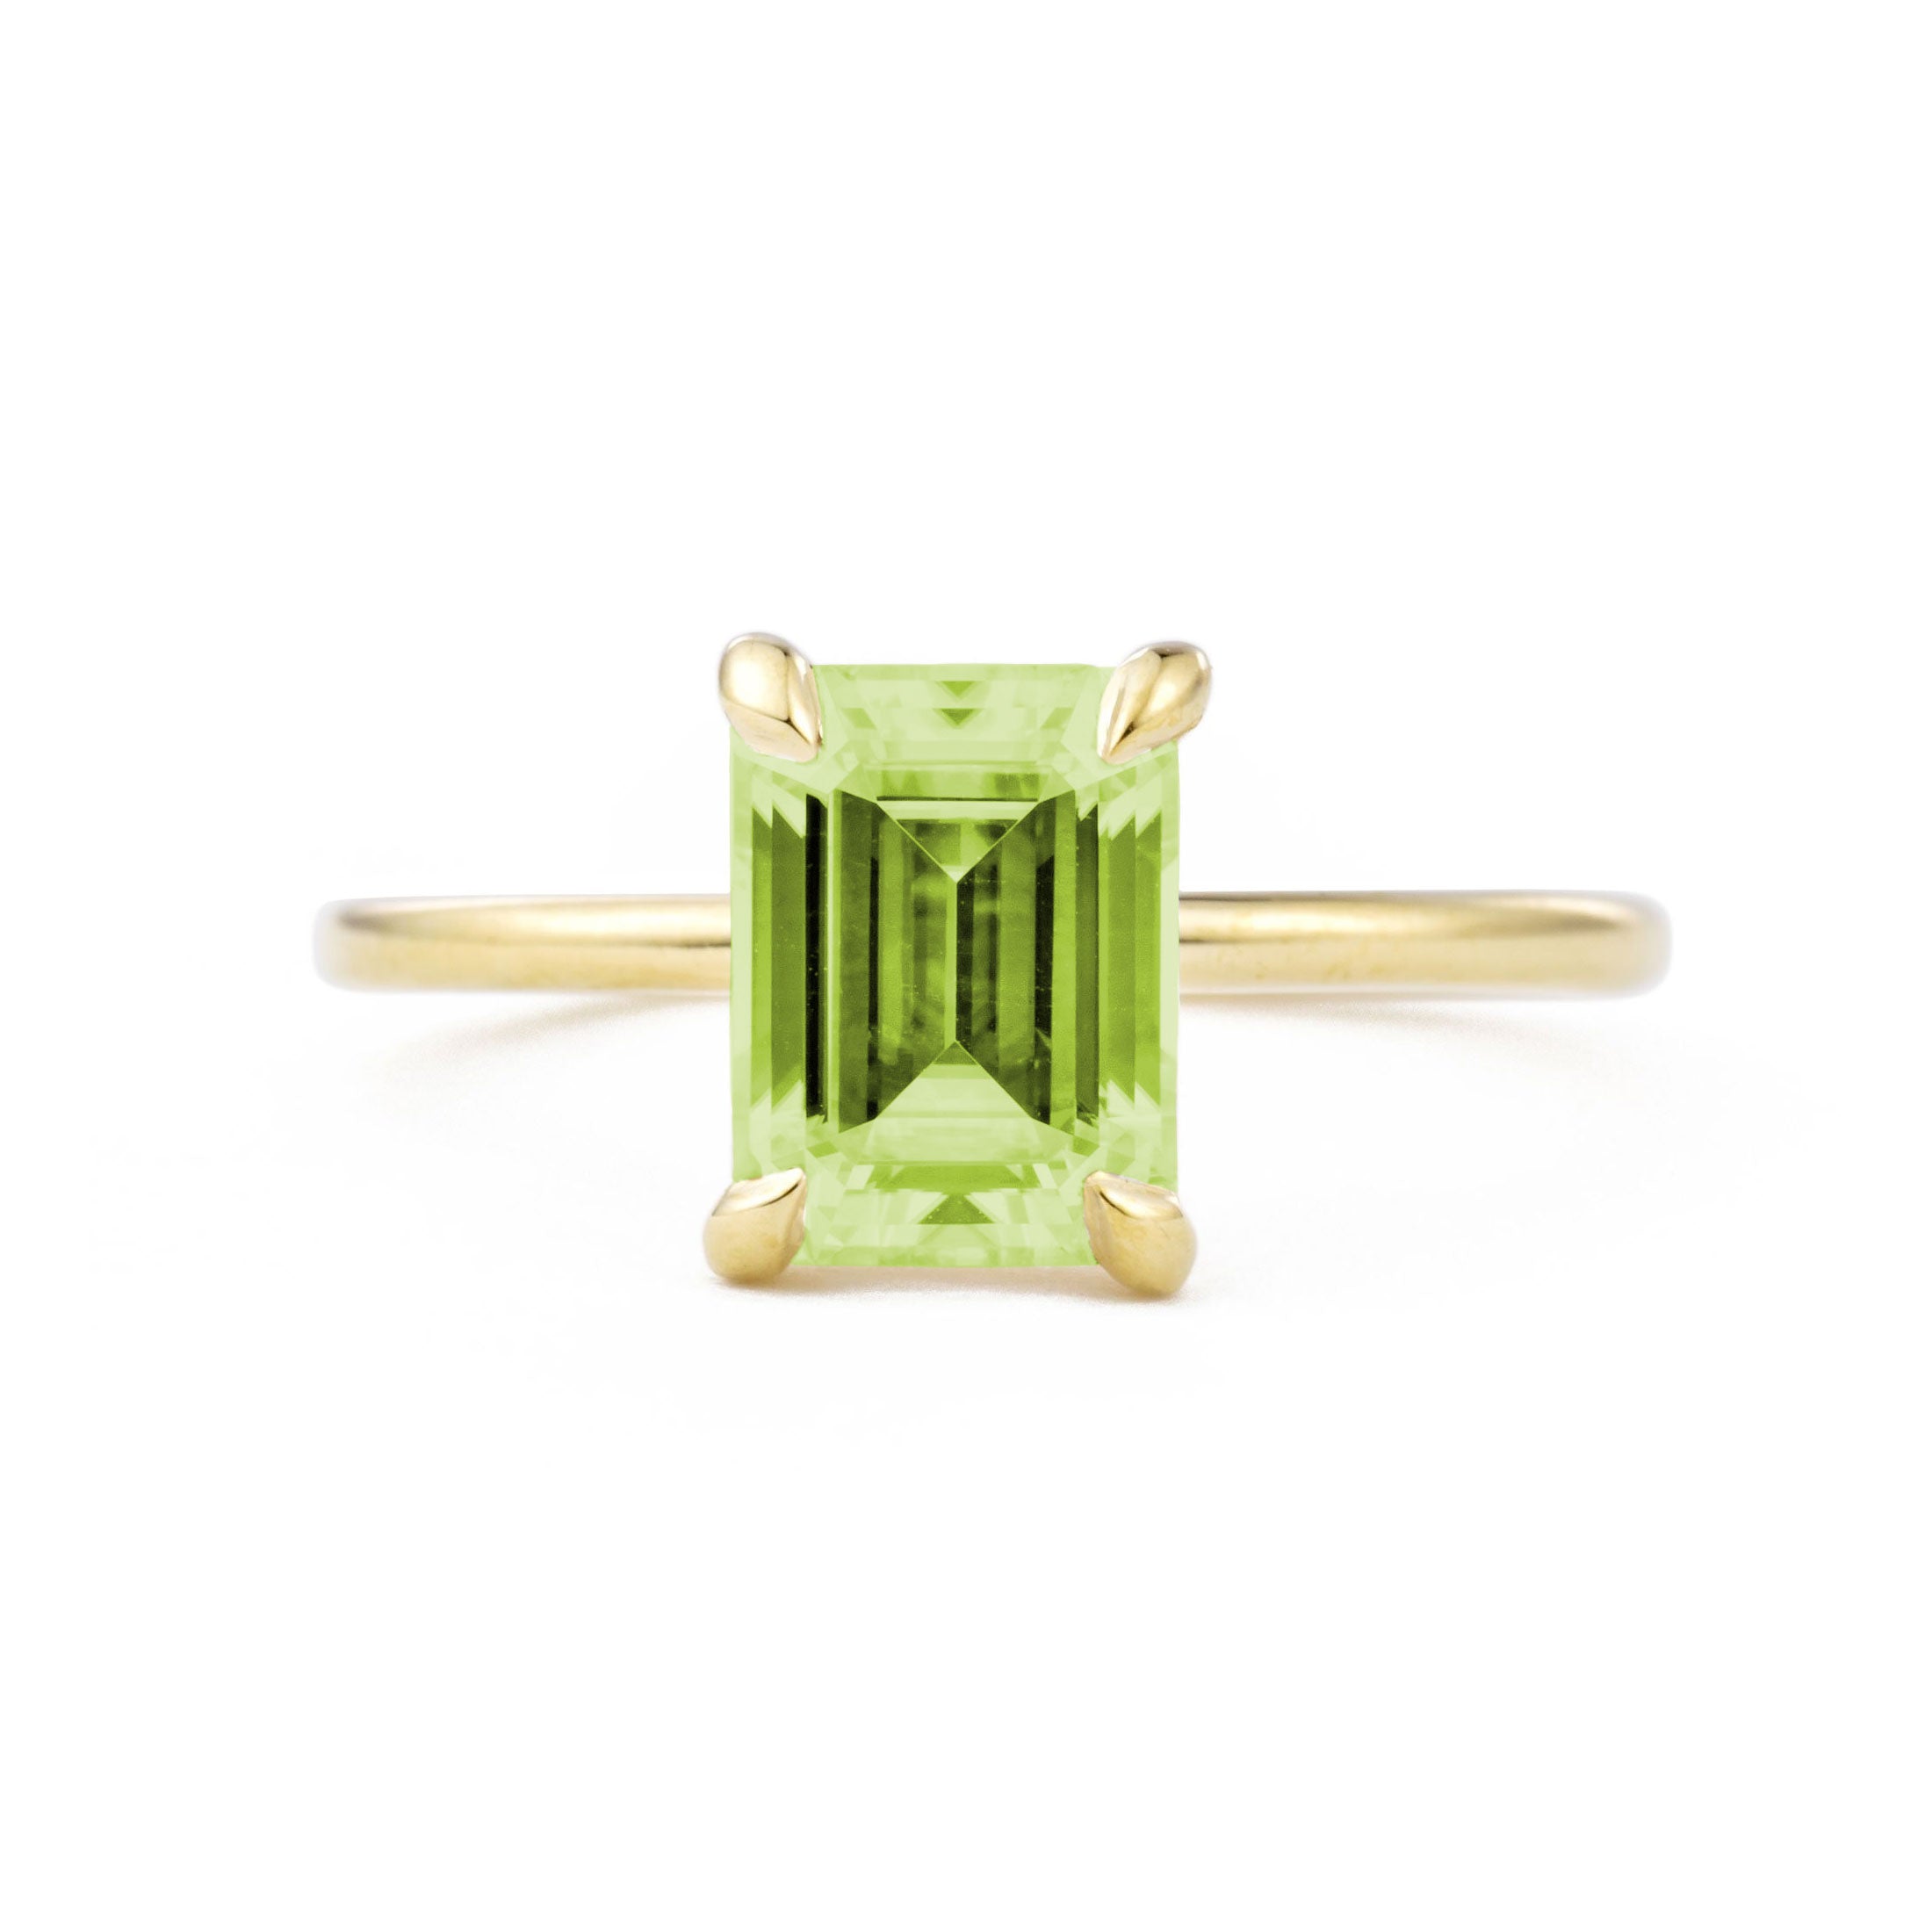 Green Modern 925 Silver Peridot Gemstone Small Rings Handmade Jewelry  SJWR-934, Size: 6-12 Us Size Available at Rs 110/gram in Jaipur